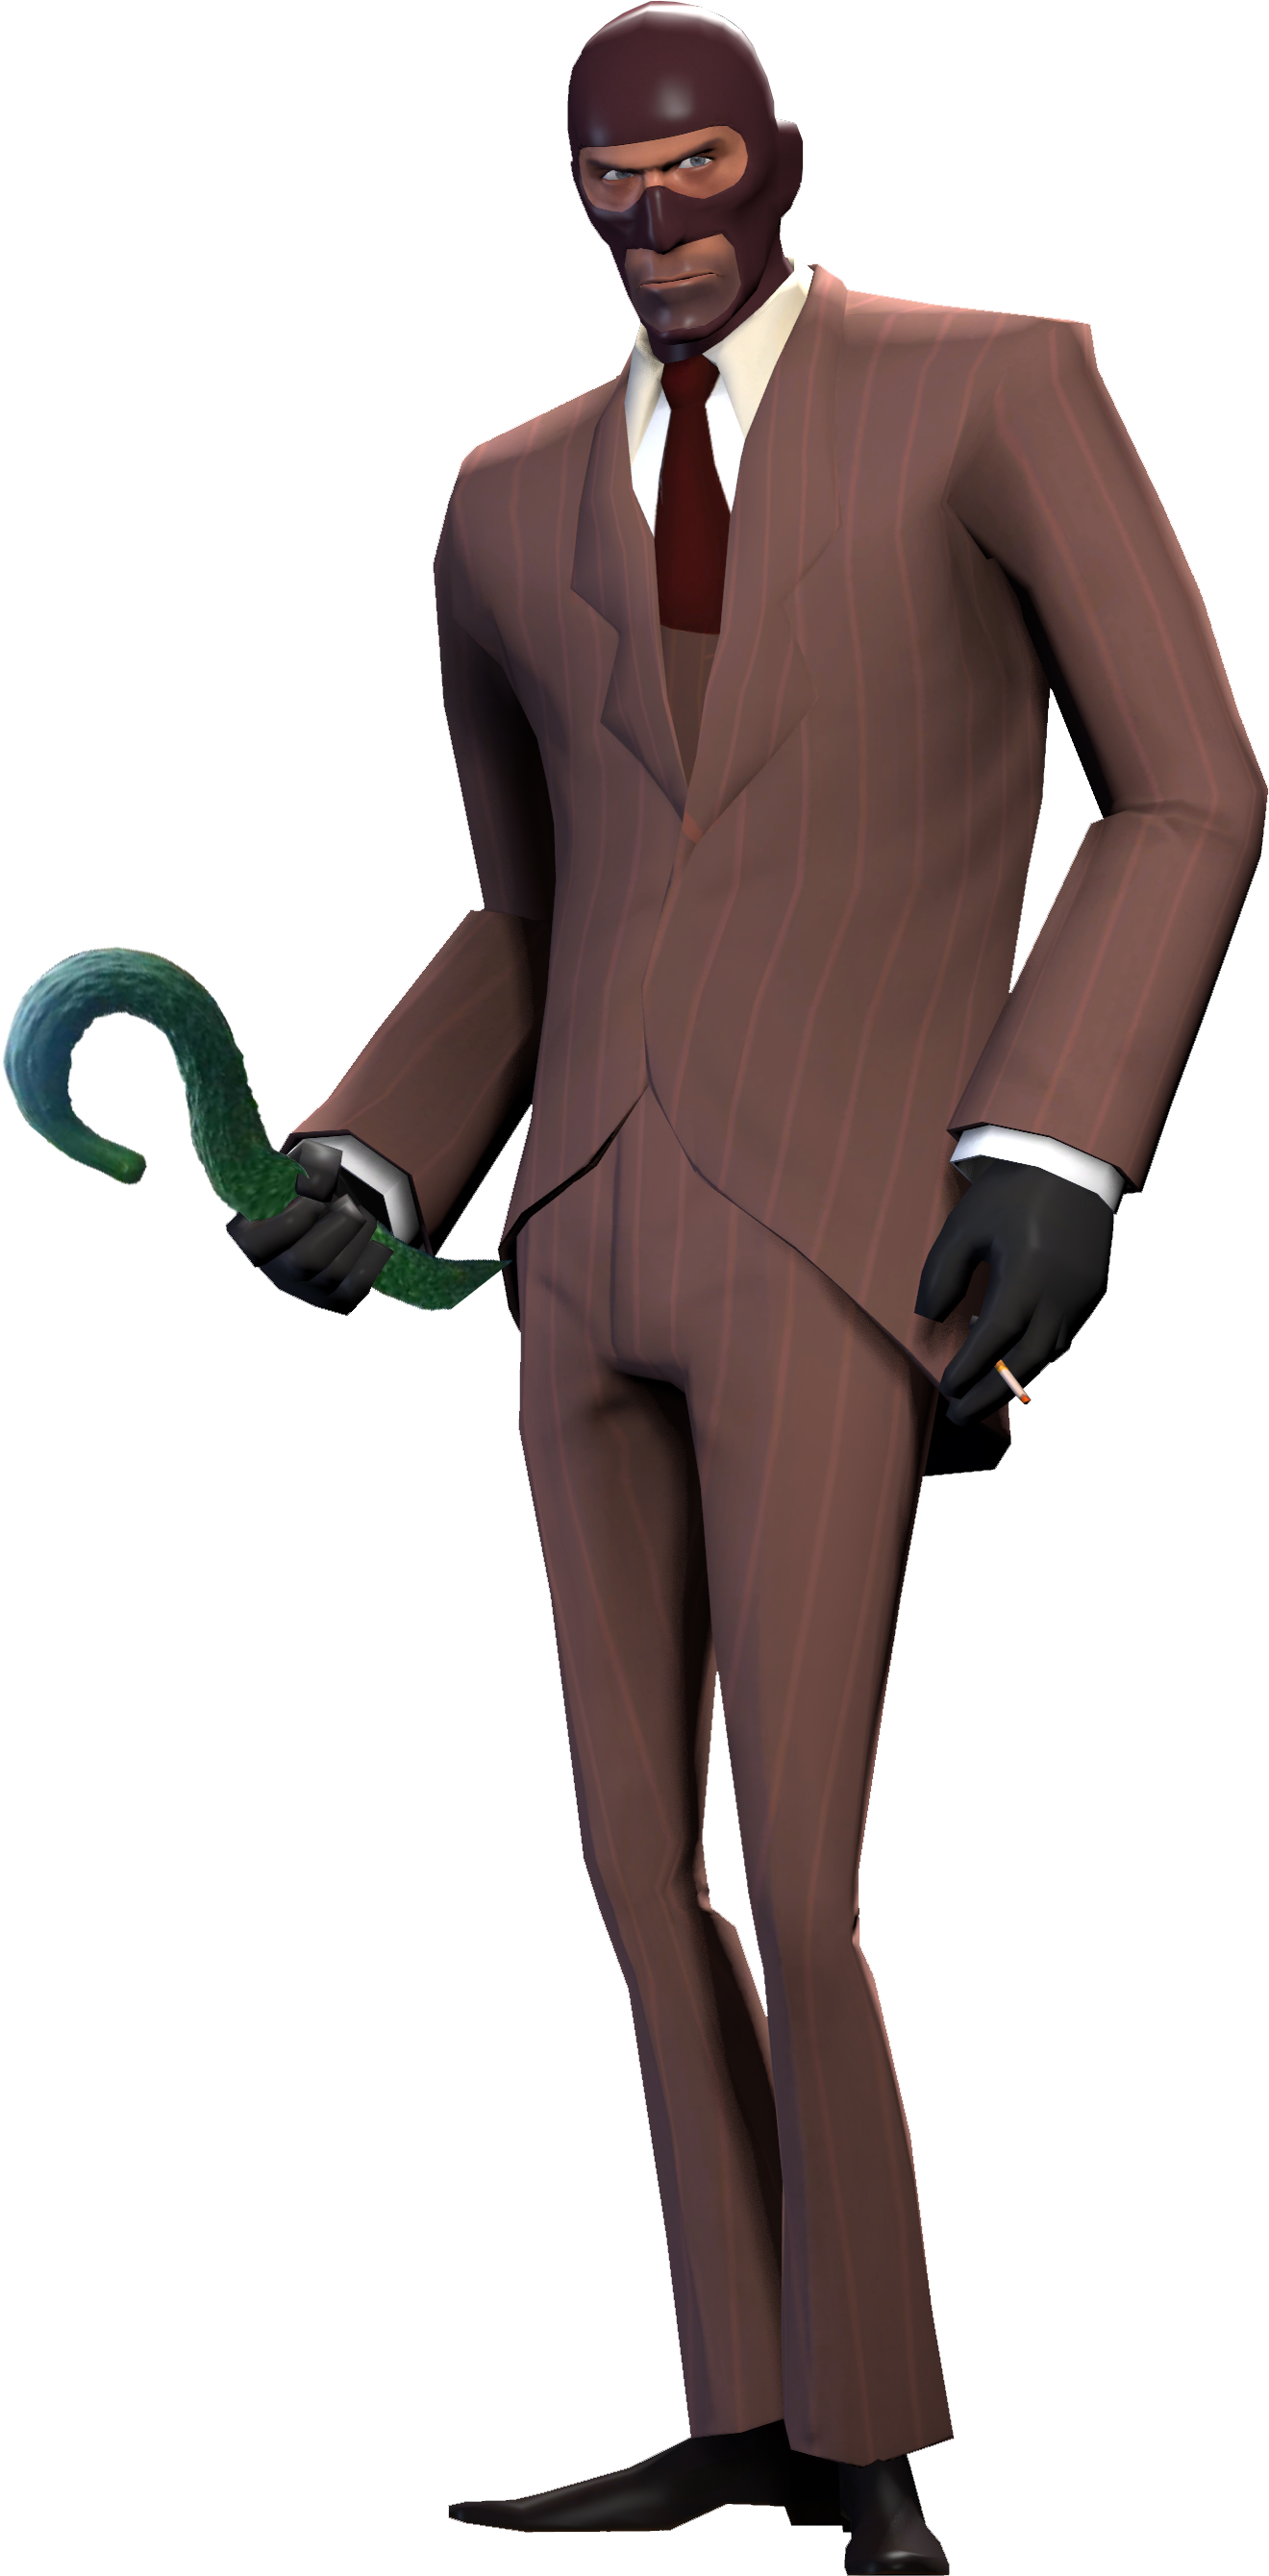 A Cartoon Character In A Suit